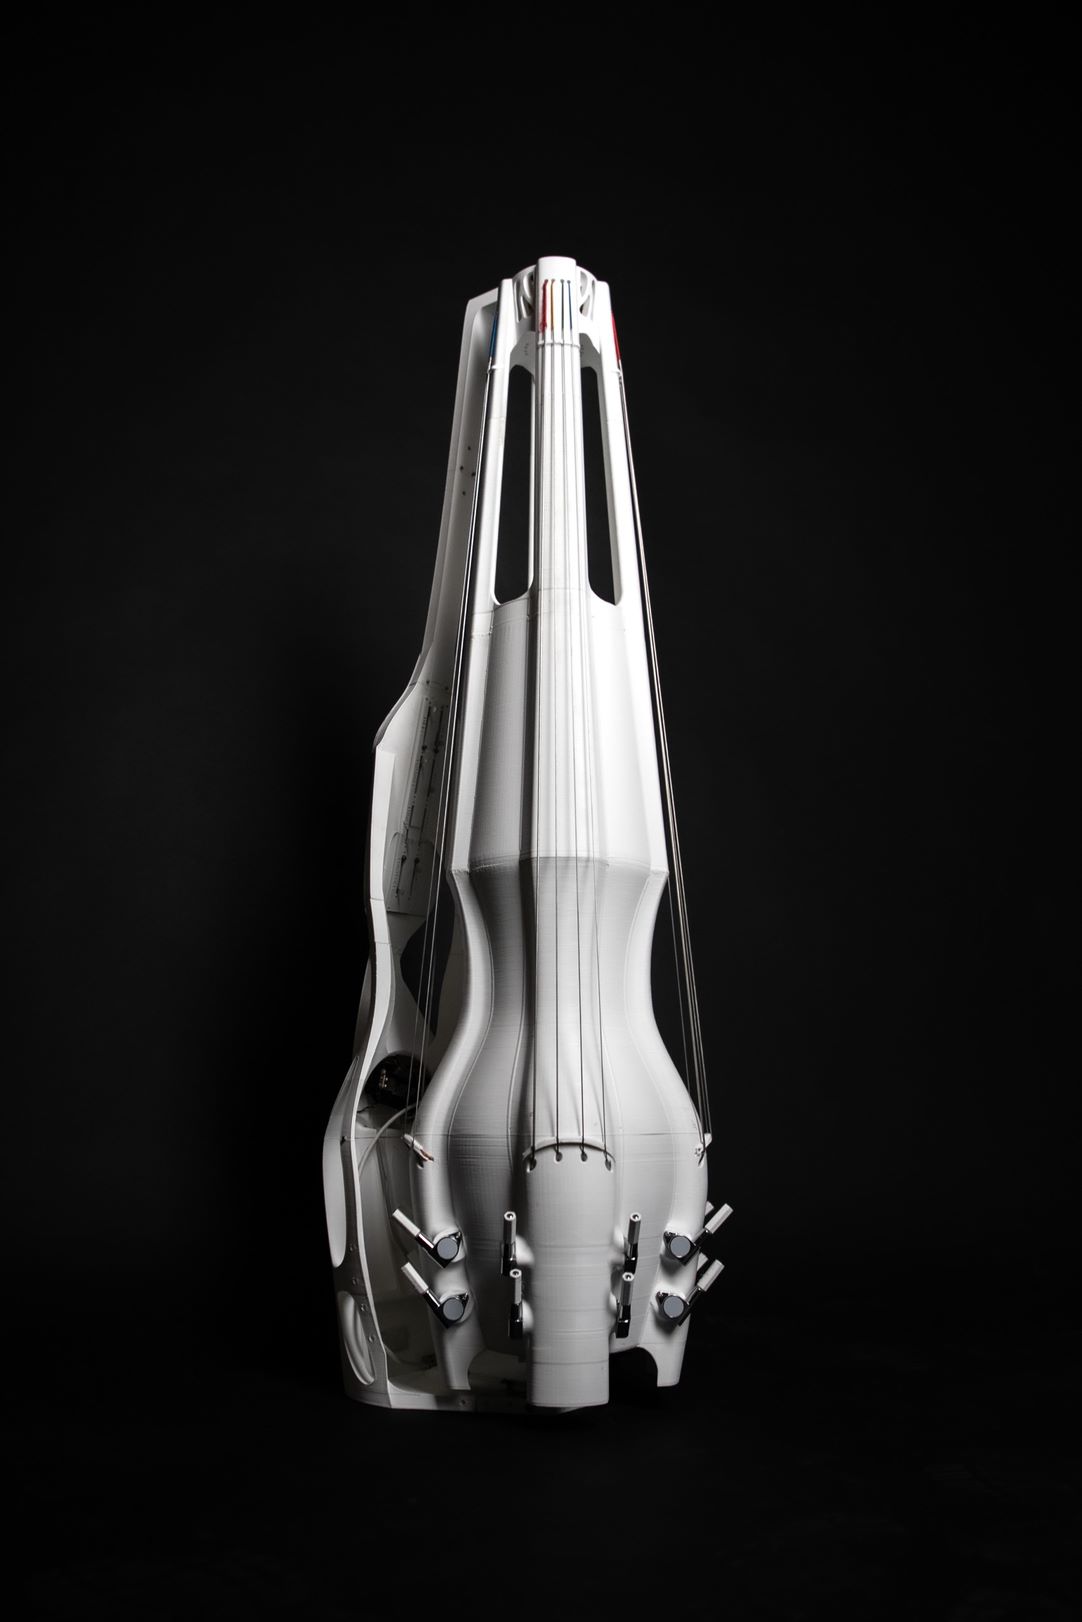 White 3D-printed upright instrument with 4 sets of strings. Black background.